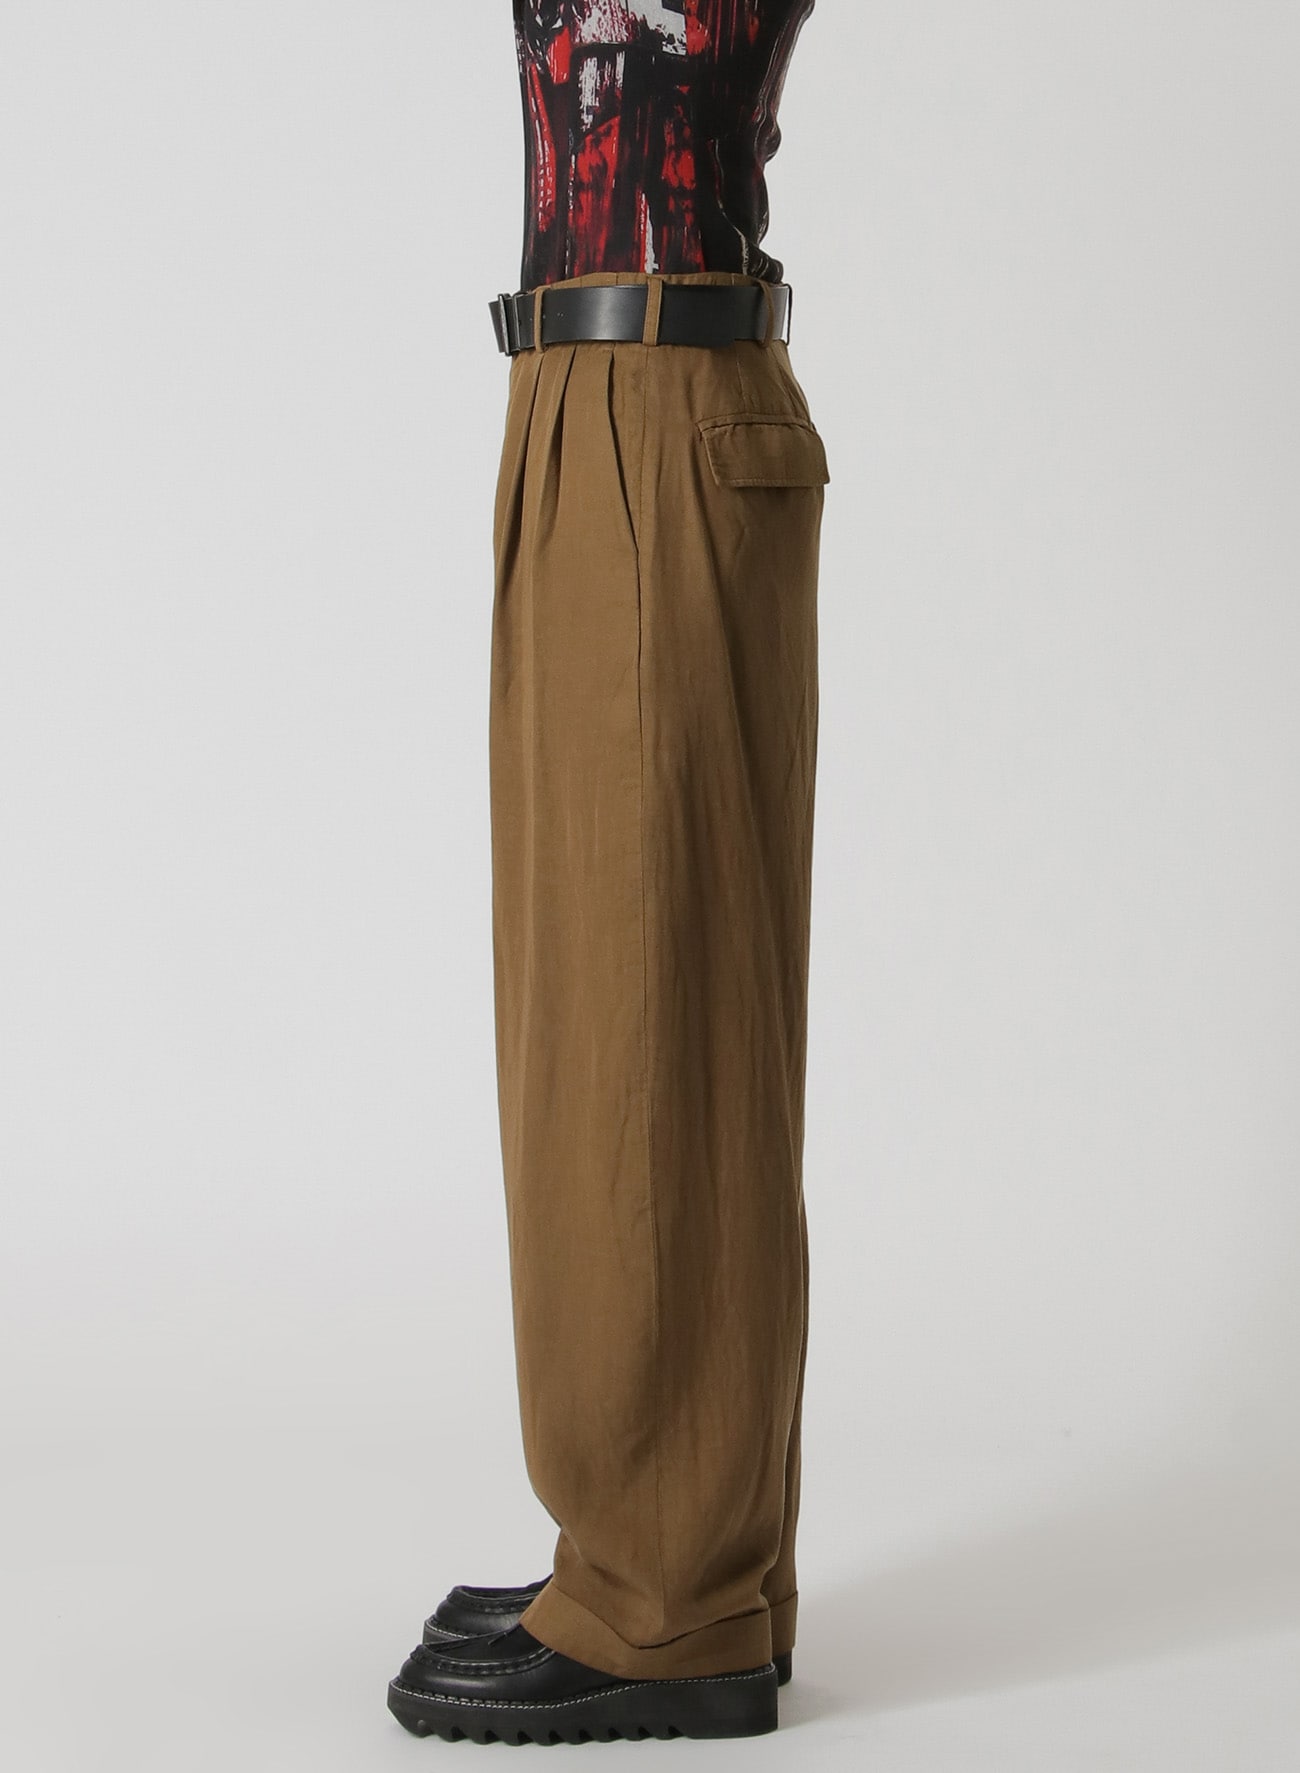 GARMENT-DYED CELLULOSE TWILL DOUBLE PLEATED CUFFED HEM PANTS(XS